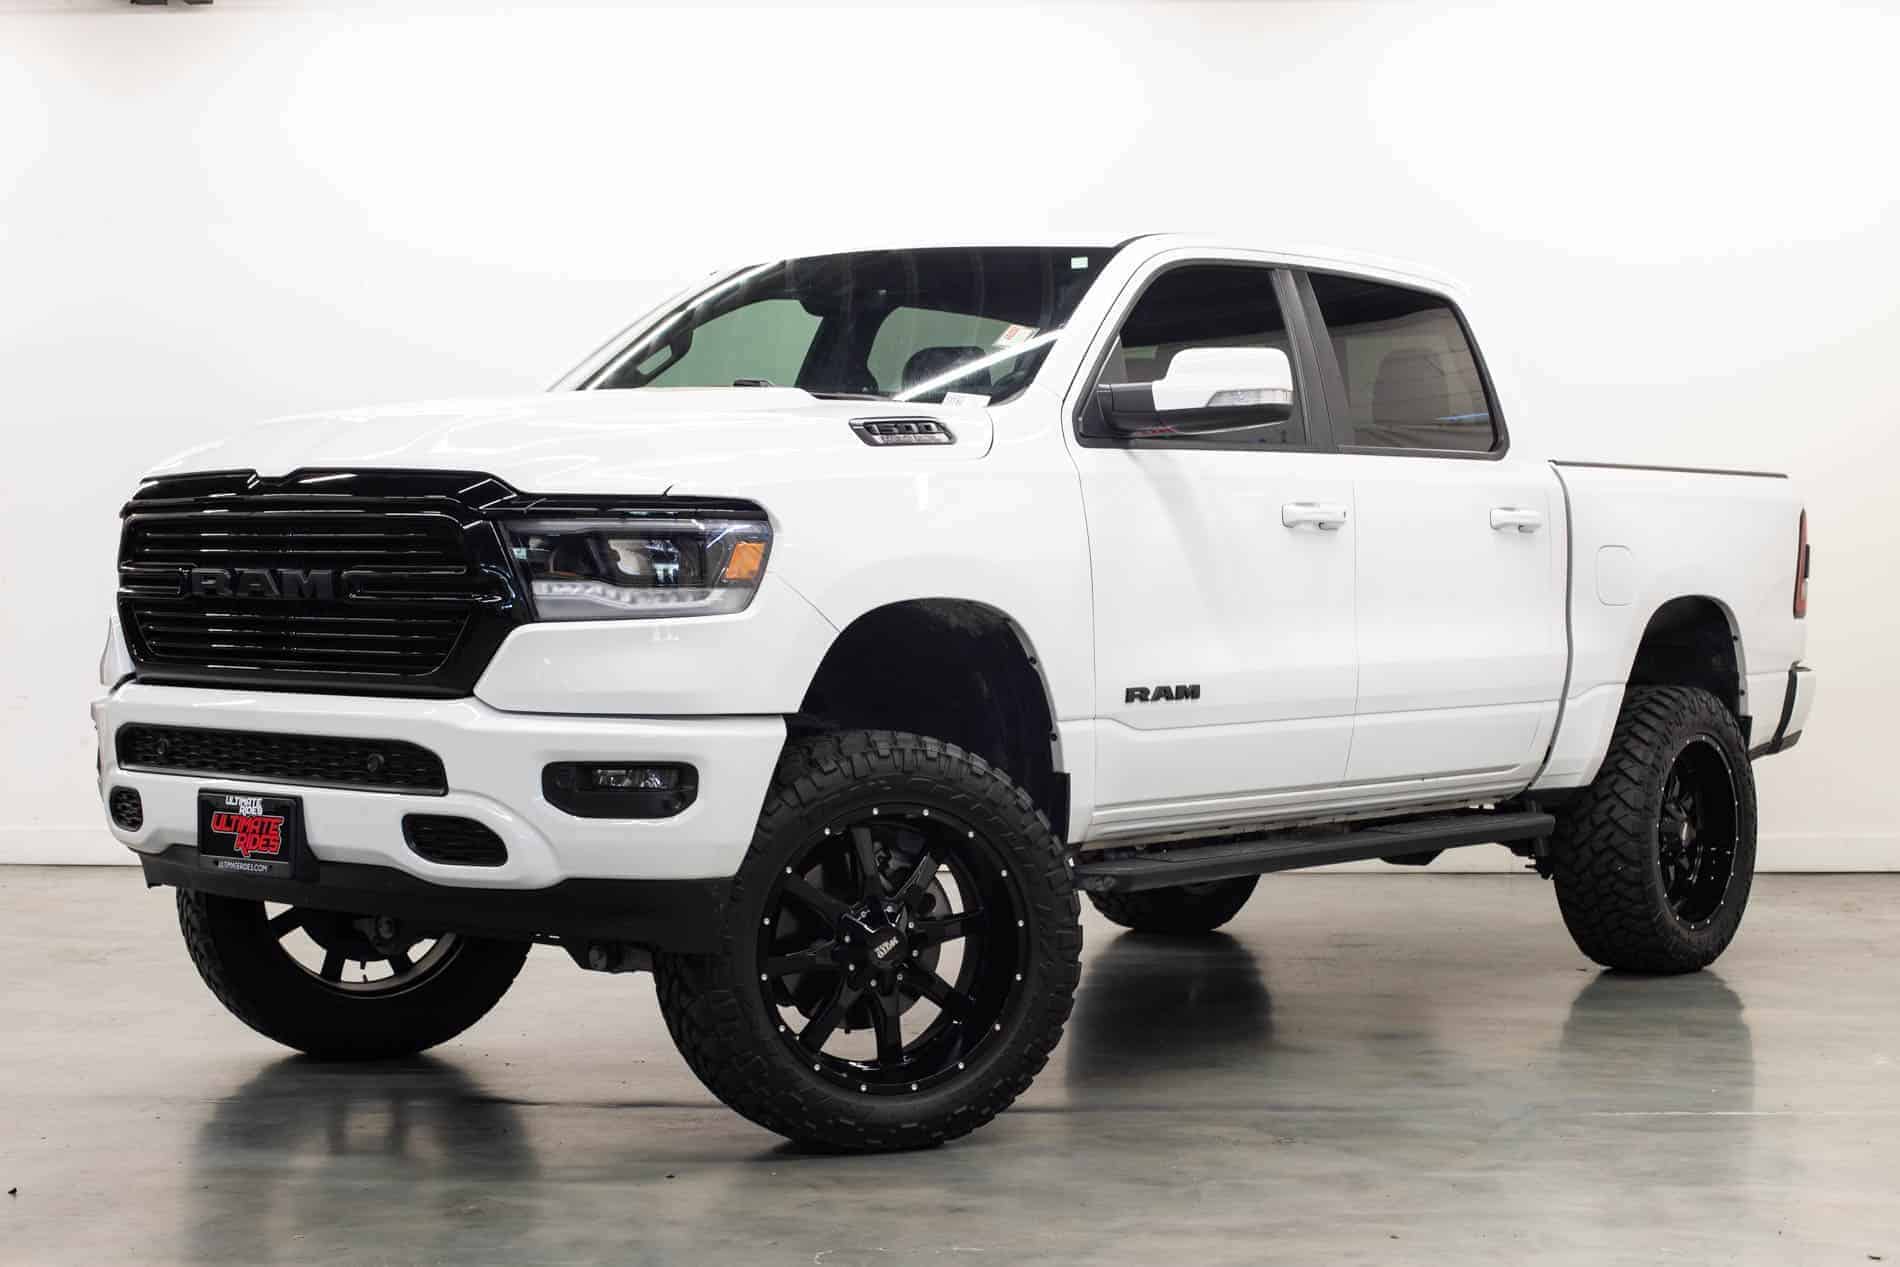 Dealerships with Lifted Trucks